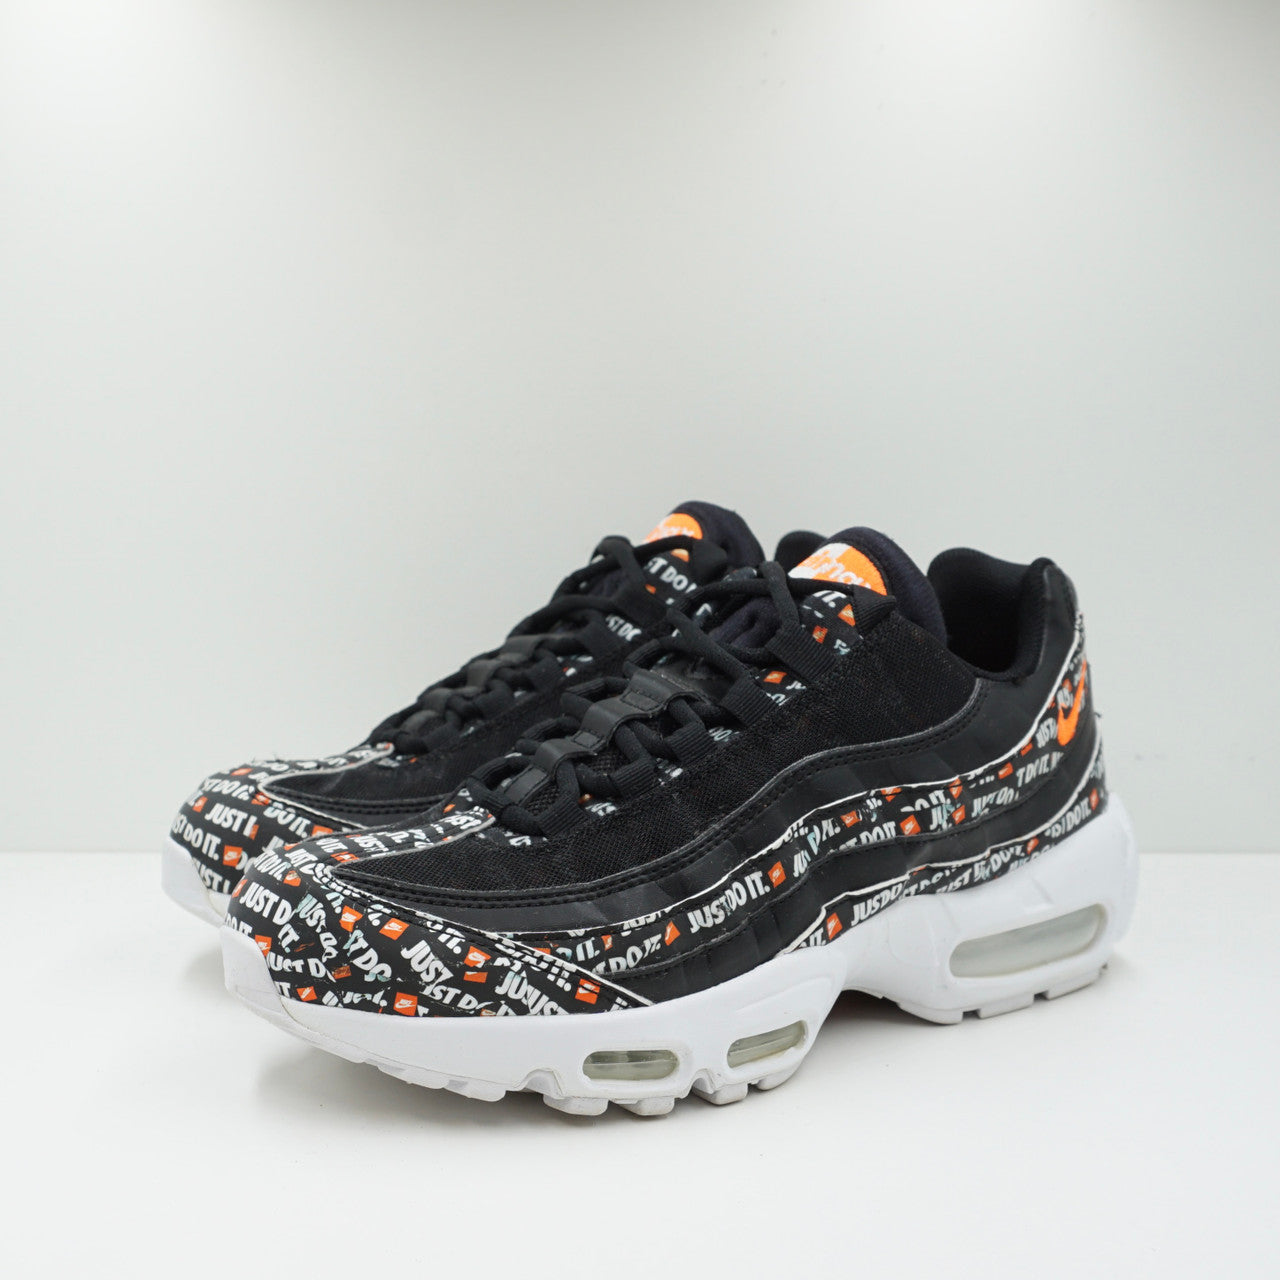 Nike Air Max 95 Just Do It Pack Black